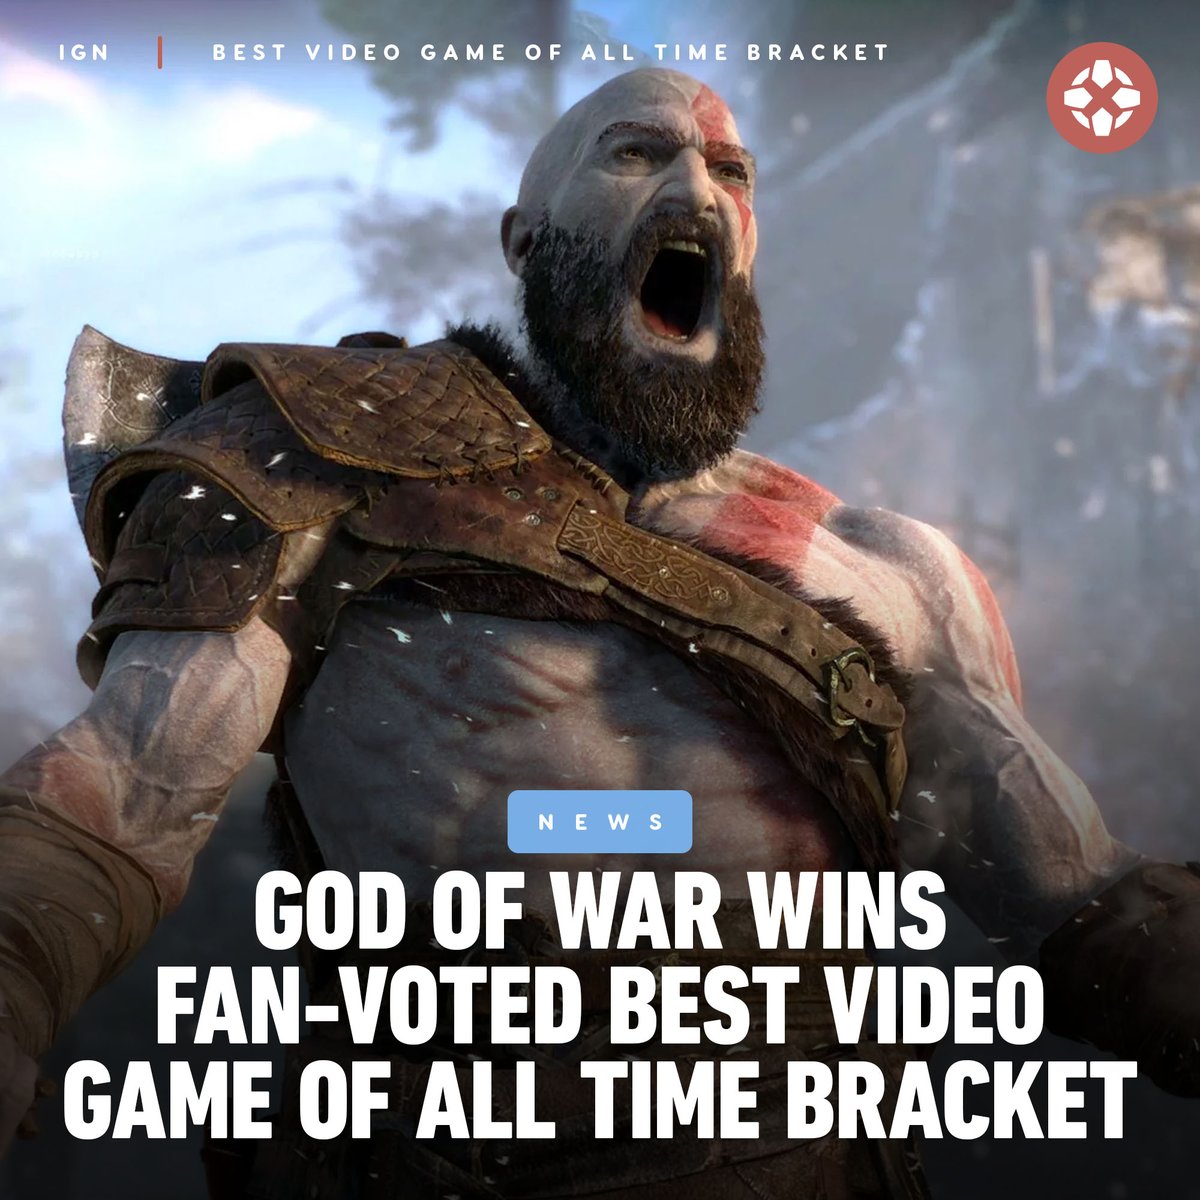 After six rounds of voting across several platforms, IGN readers have crowned God of War (2018) as the best video game of all time, which beat out GTA 5 in the final round. Presented by @Hulu